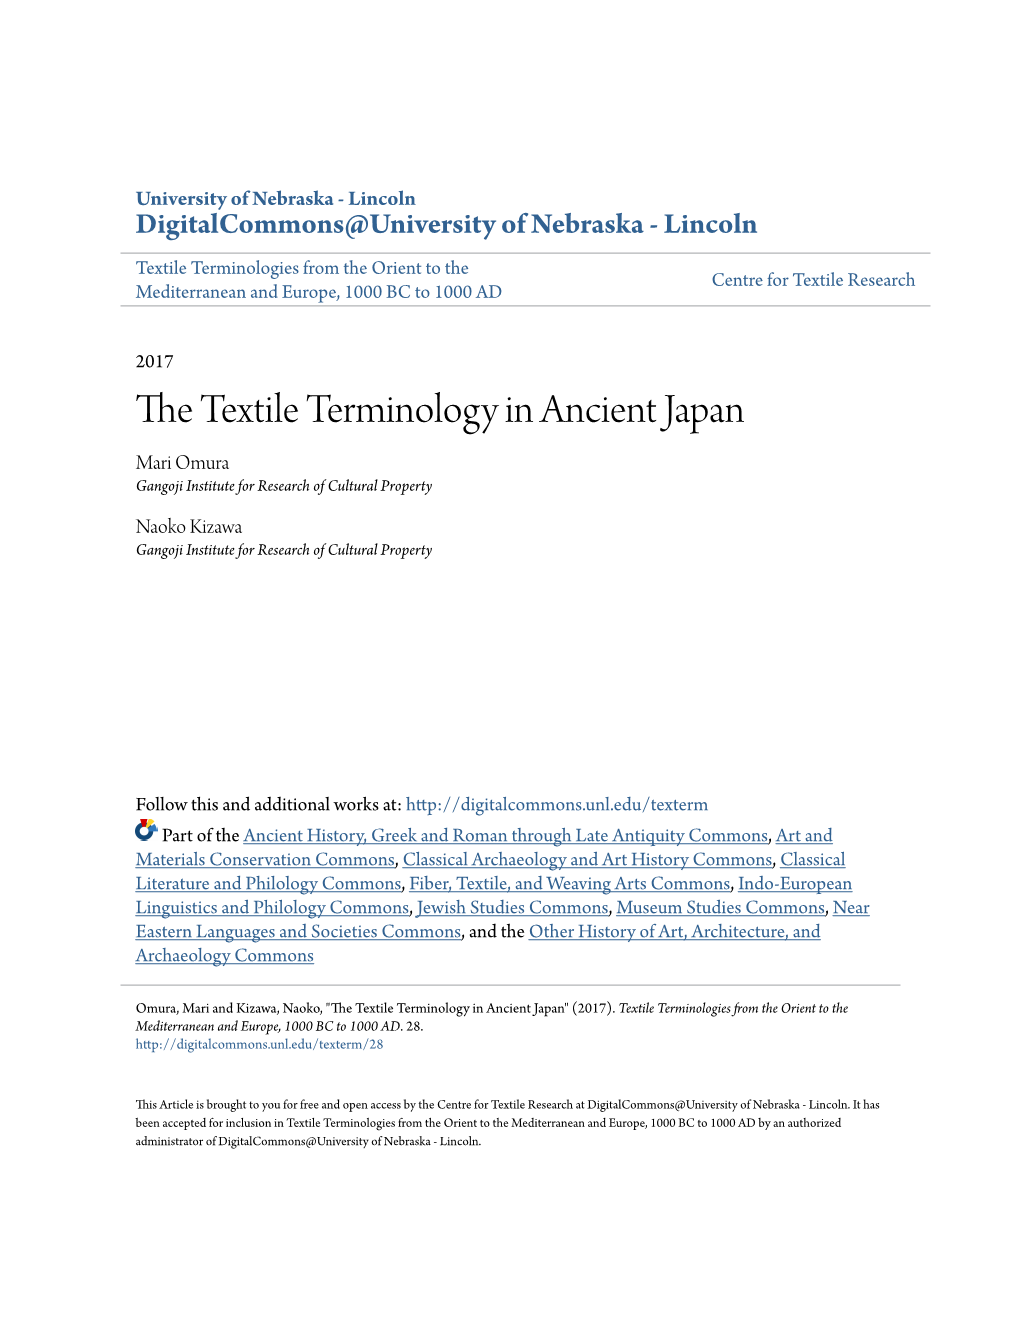 The Textile Terminology in Ancient Japan